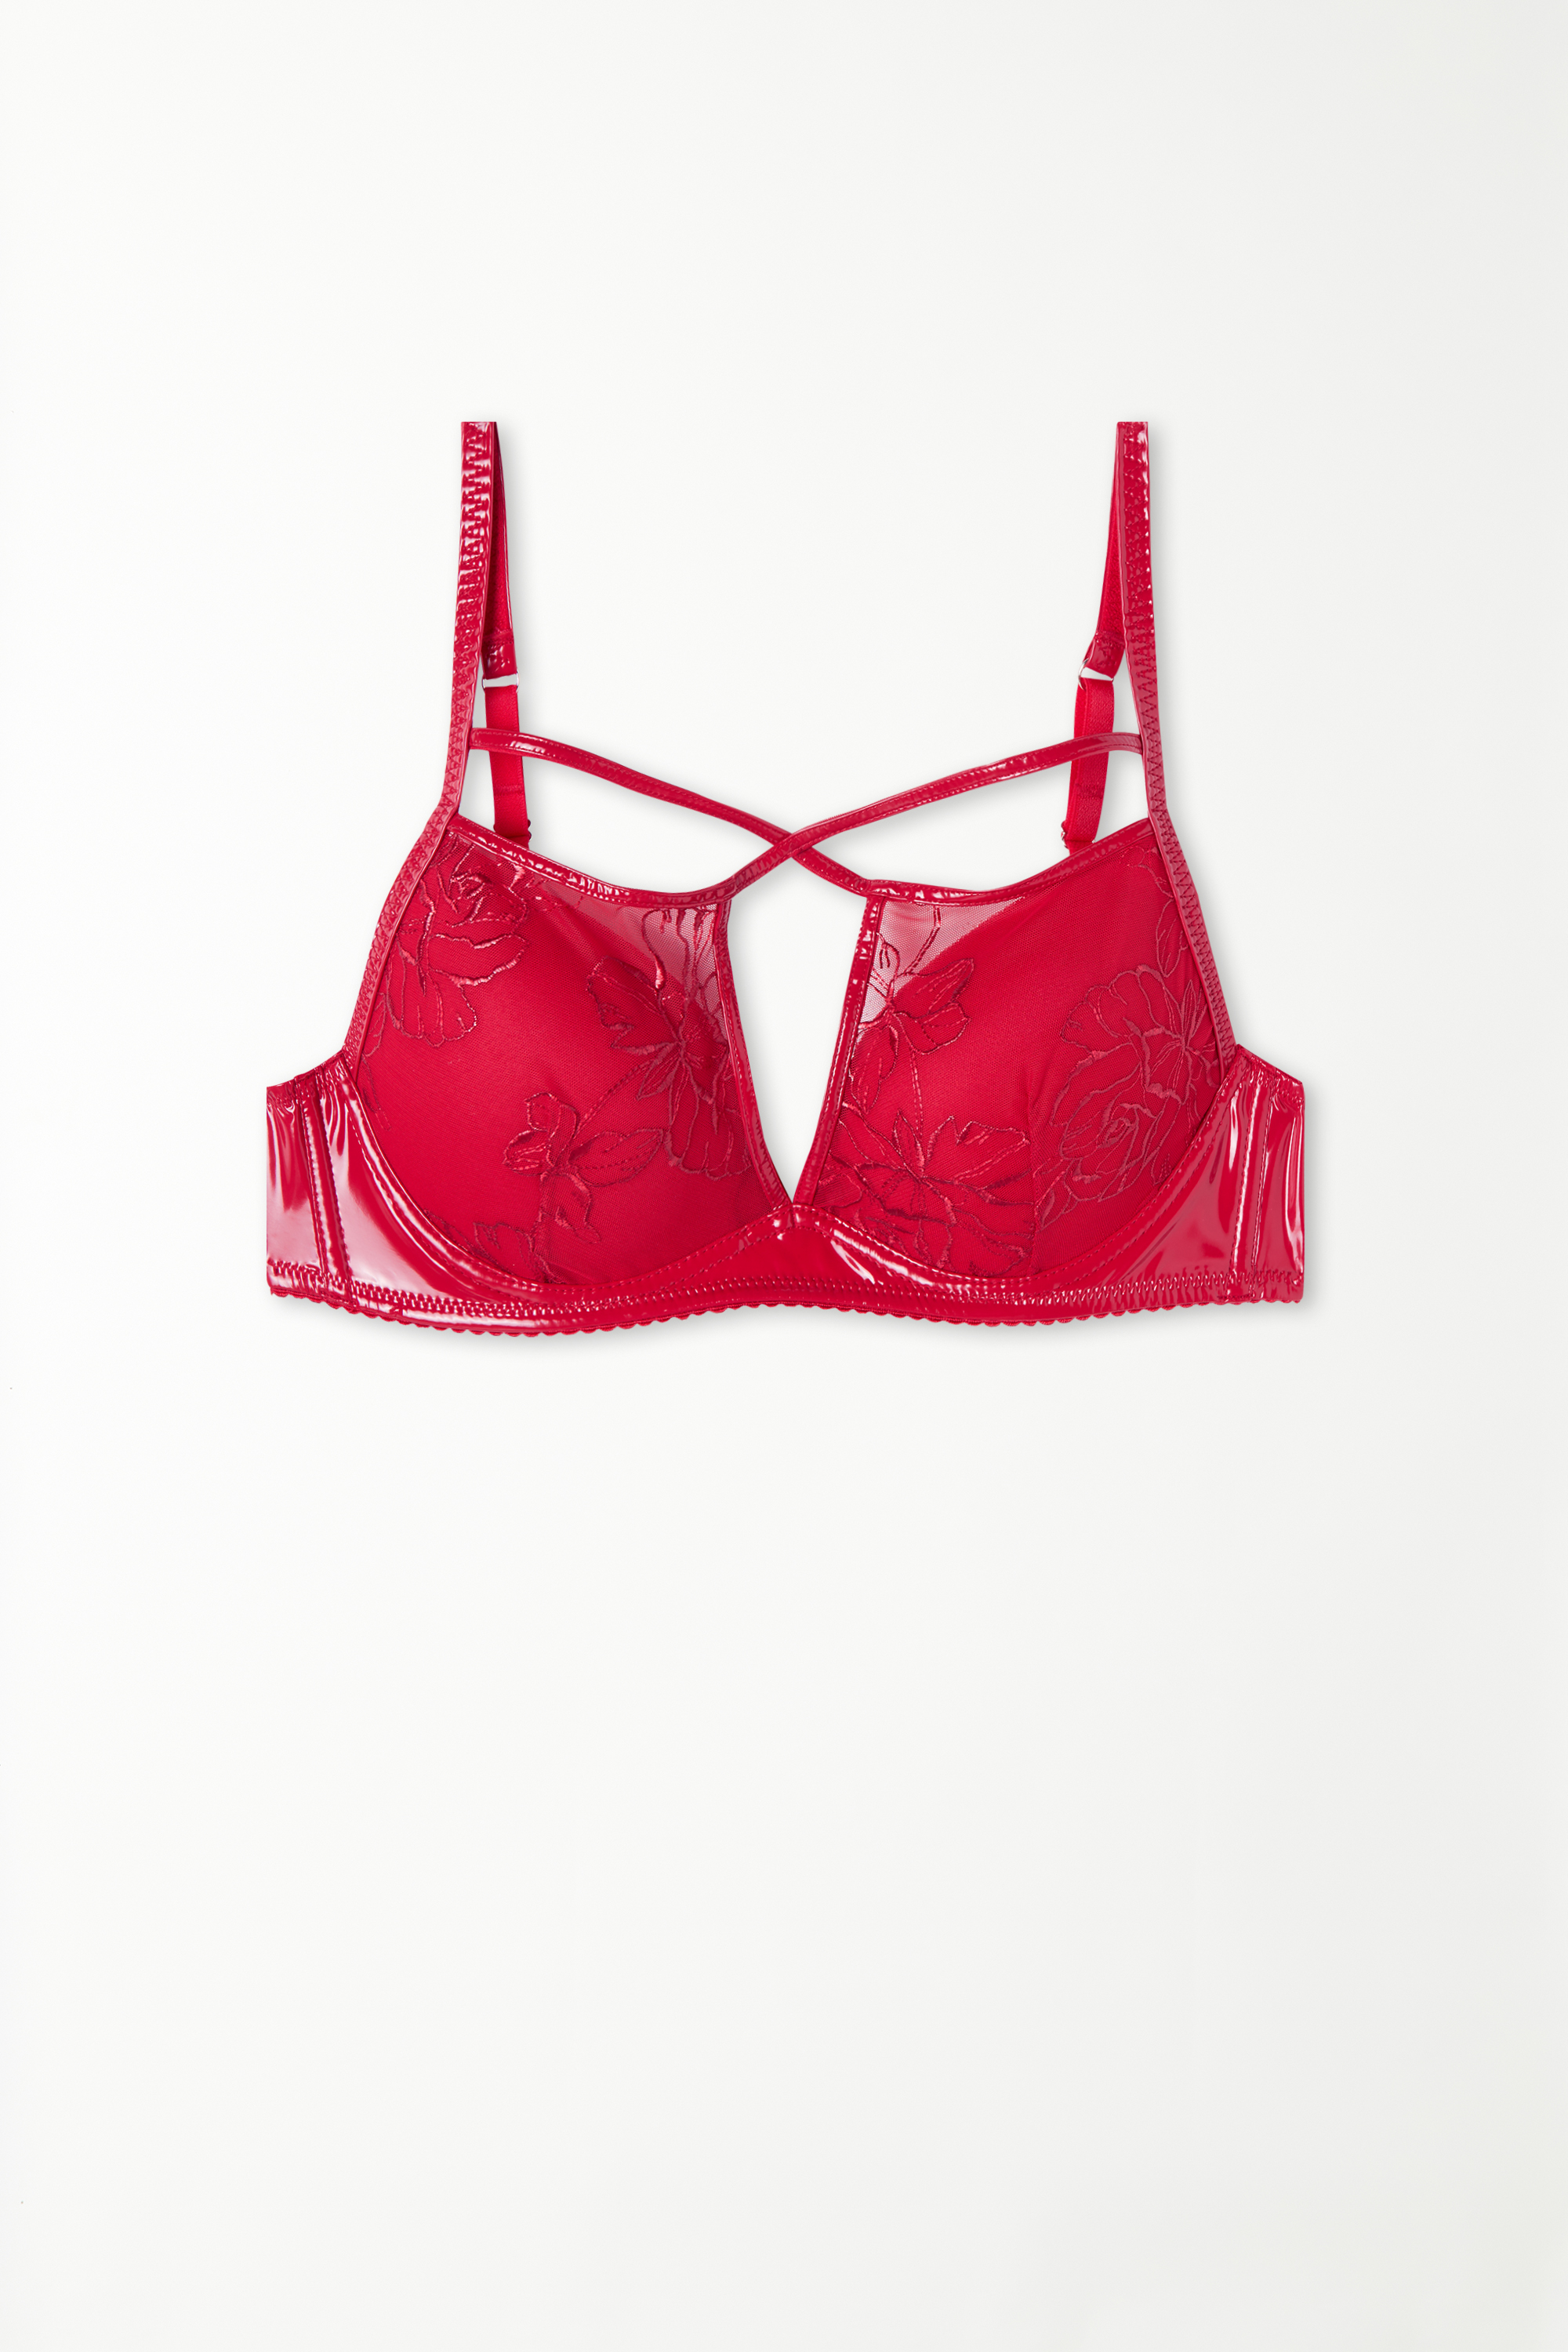 Moscow Red Lace Vinyl Push-Up Bra